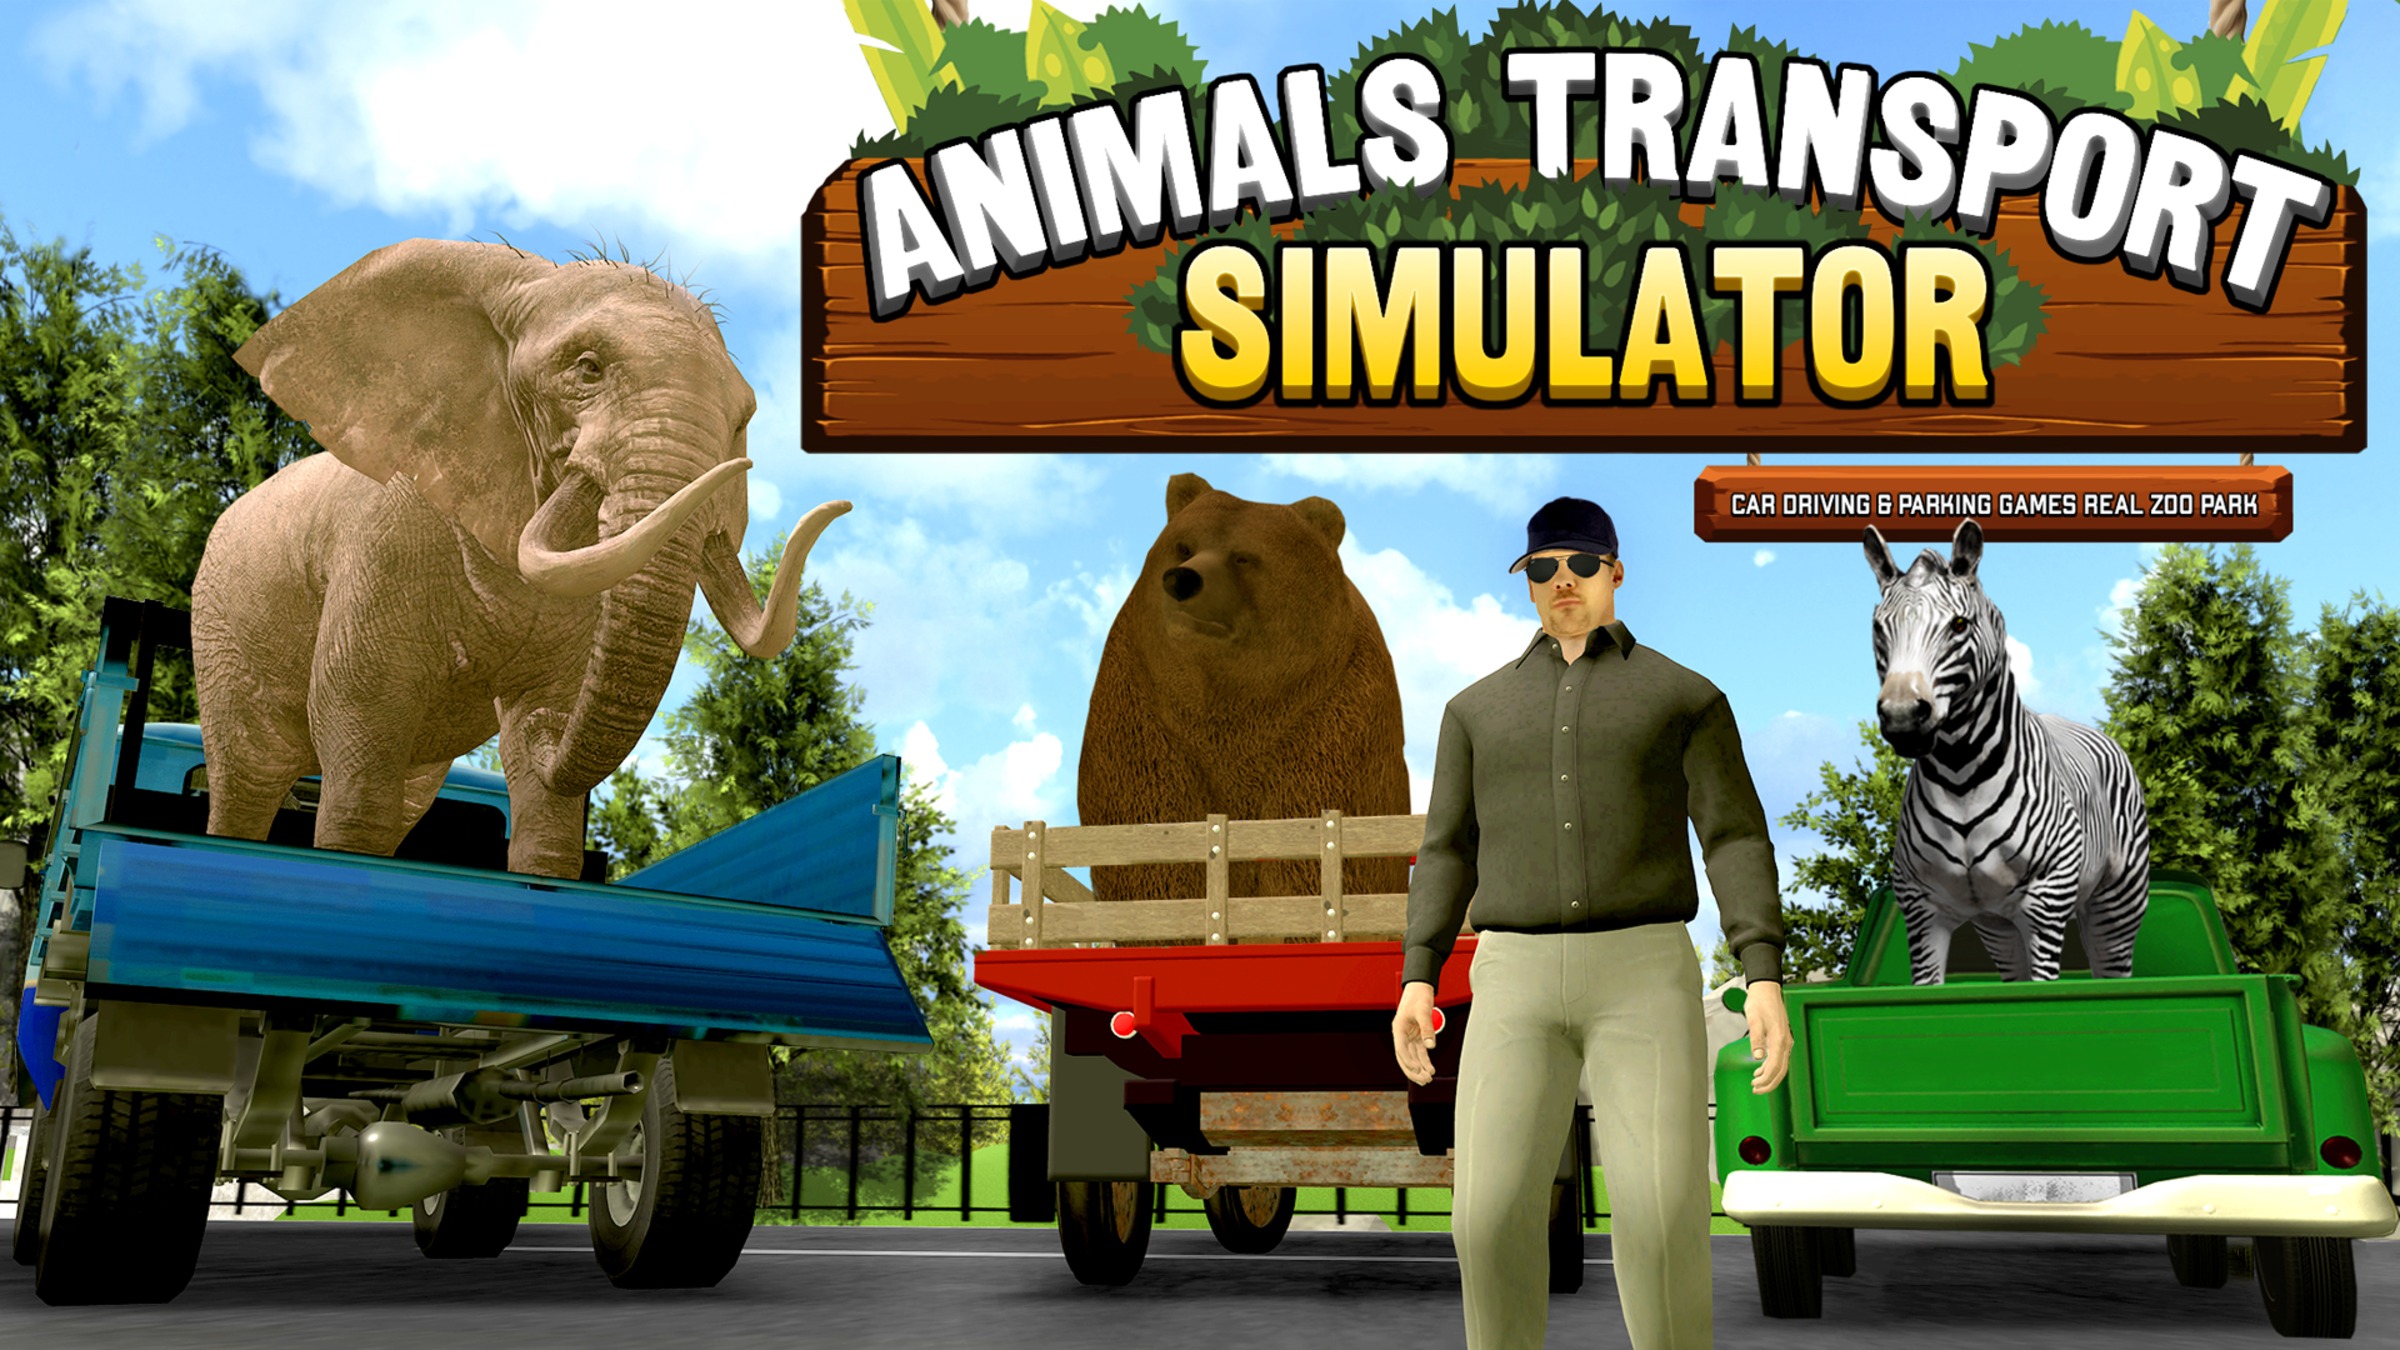 Animals Transport Simulator - Car Driving & Parking Games Real Zoo Park for  Nintendo Switch - Nintendo Official Site